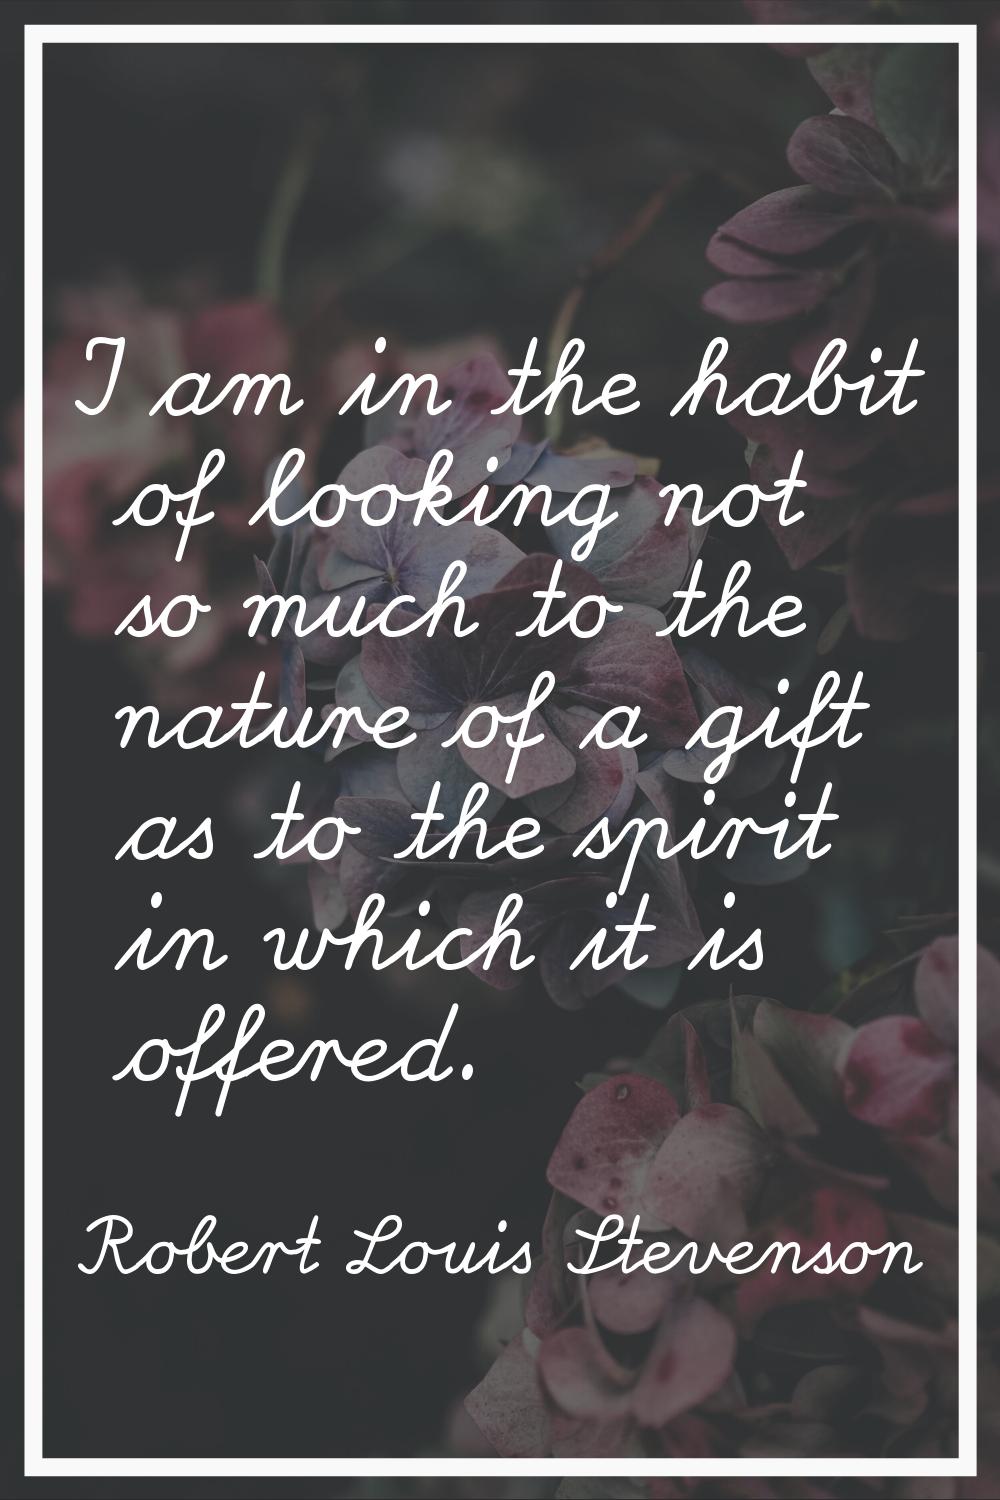 I am in the habit of looking not so much to the nature of a gift as to the spirit in which it is of